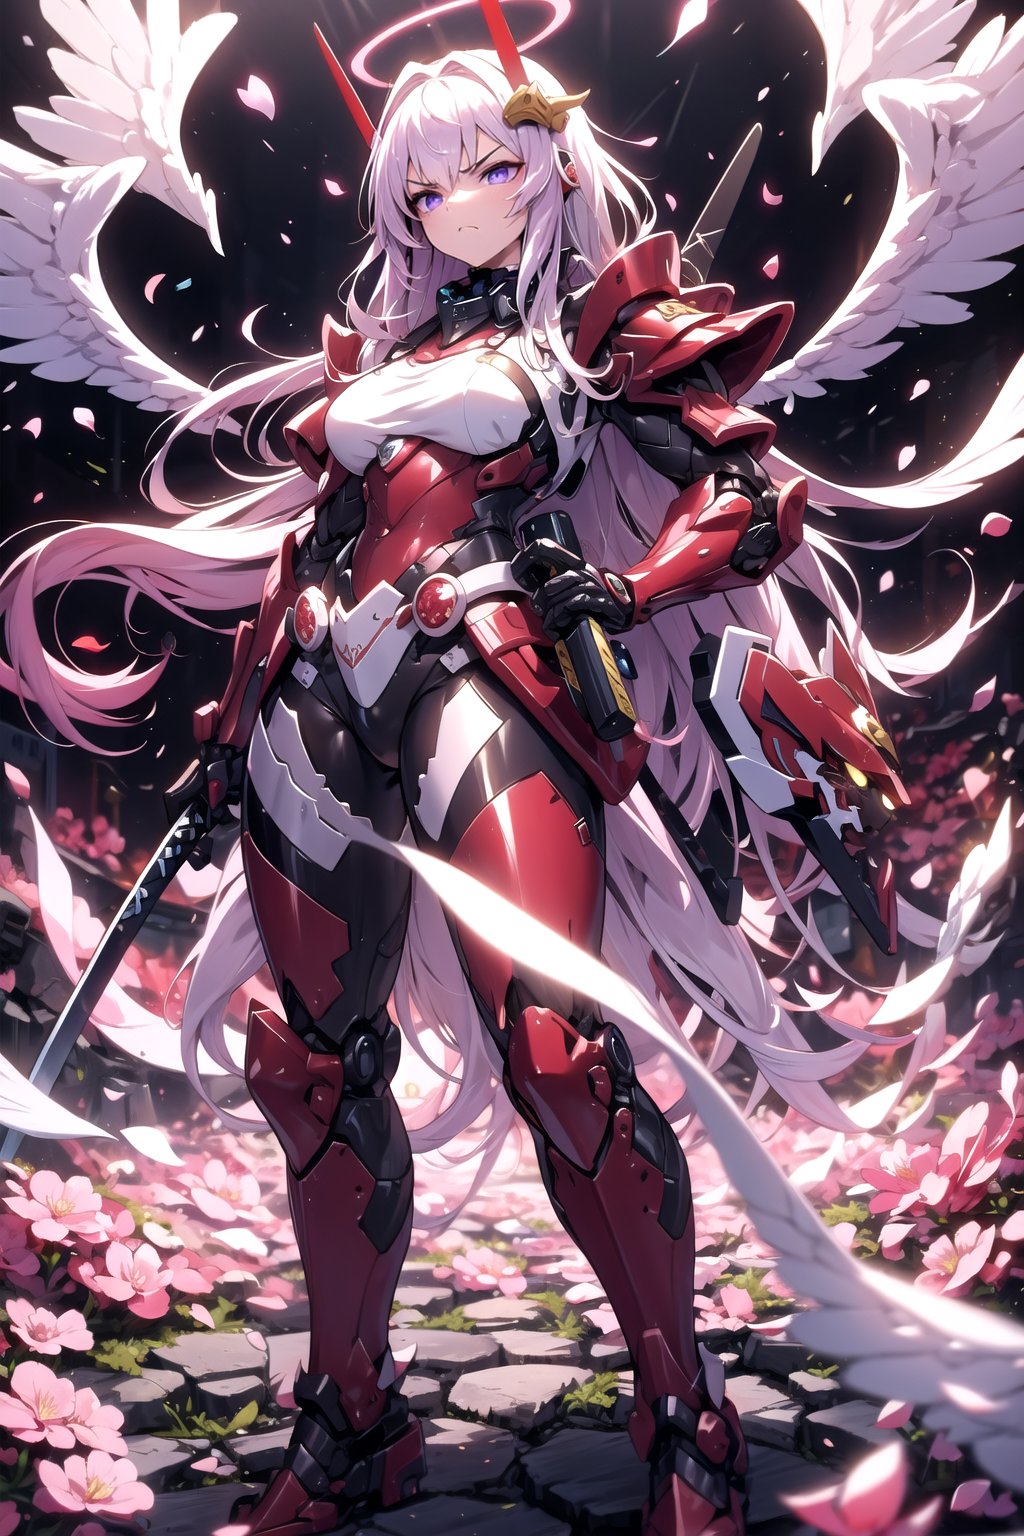 masterpiece, best quality, 1girl, long white hair, purple eyes, angel theme, samurai armor, shogun armor, red armor, samurai headgear, energy angel halo, sakura petals falling, holding sword, battle scene, serious face, angry face, fire in background, robotic angel wings, SFW, white chestplate, red limbs, samurai shoulder armor, red gauntlets, holding katana, looking down, depth of field, high detailed, full body armor, samurai headgear, battle scene, fire in background, sakura petal ring in background, closeup shot, vanessa, angel theme, angel halo, red armor, consistent, red armor, full armor, mecha armor, ,mudrock(arknights), red suit, big shoulder armor, thighs, right hand holding sword, wing on headgear, hermes headgear